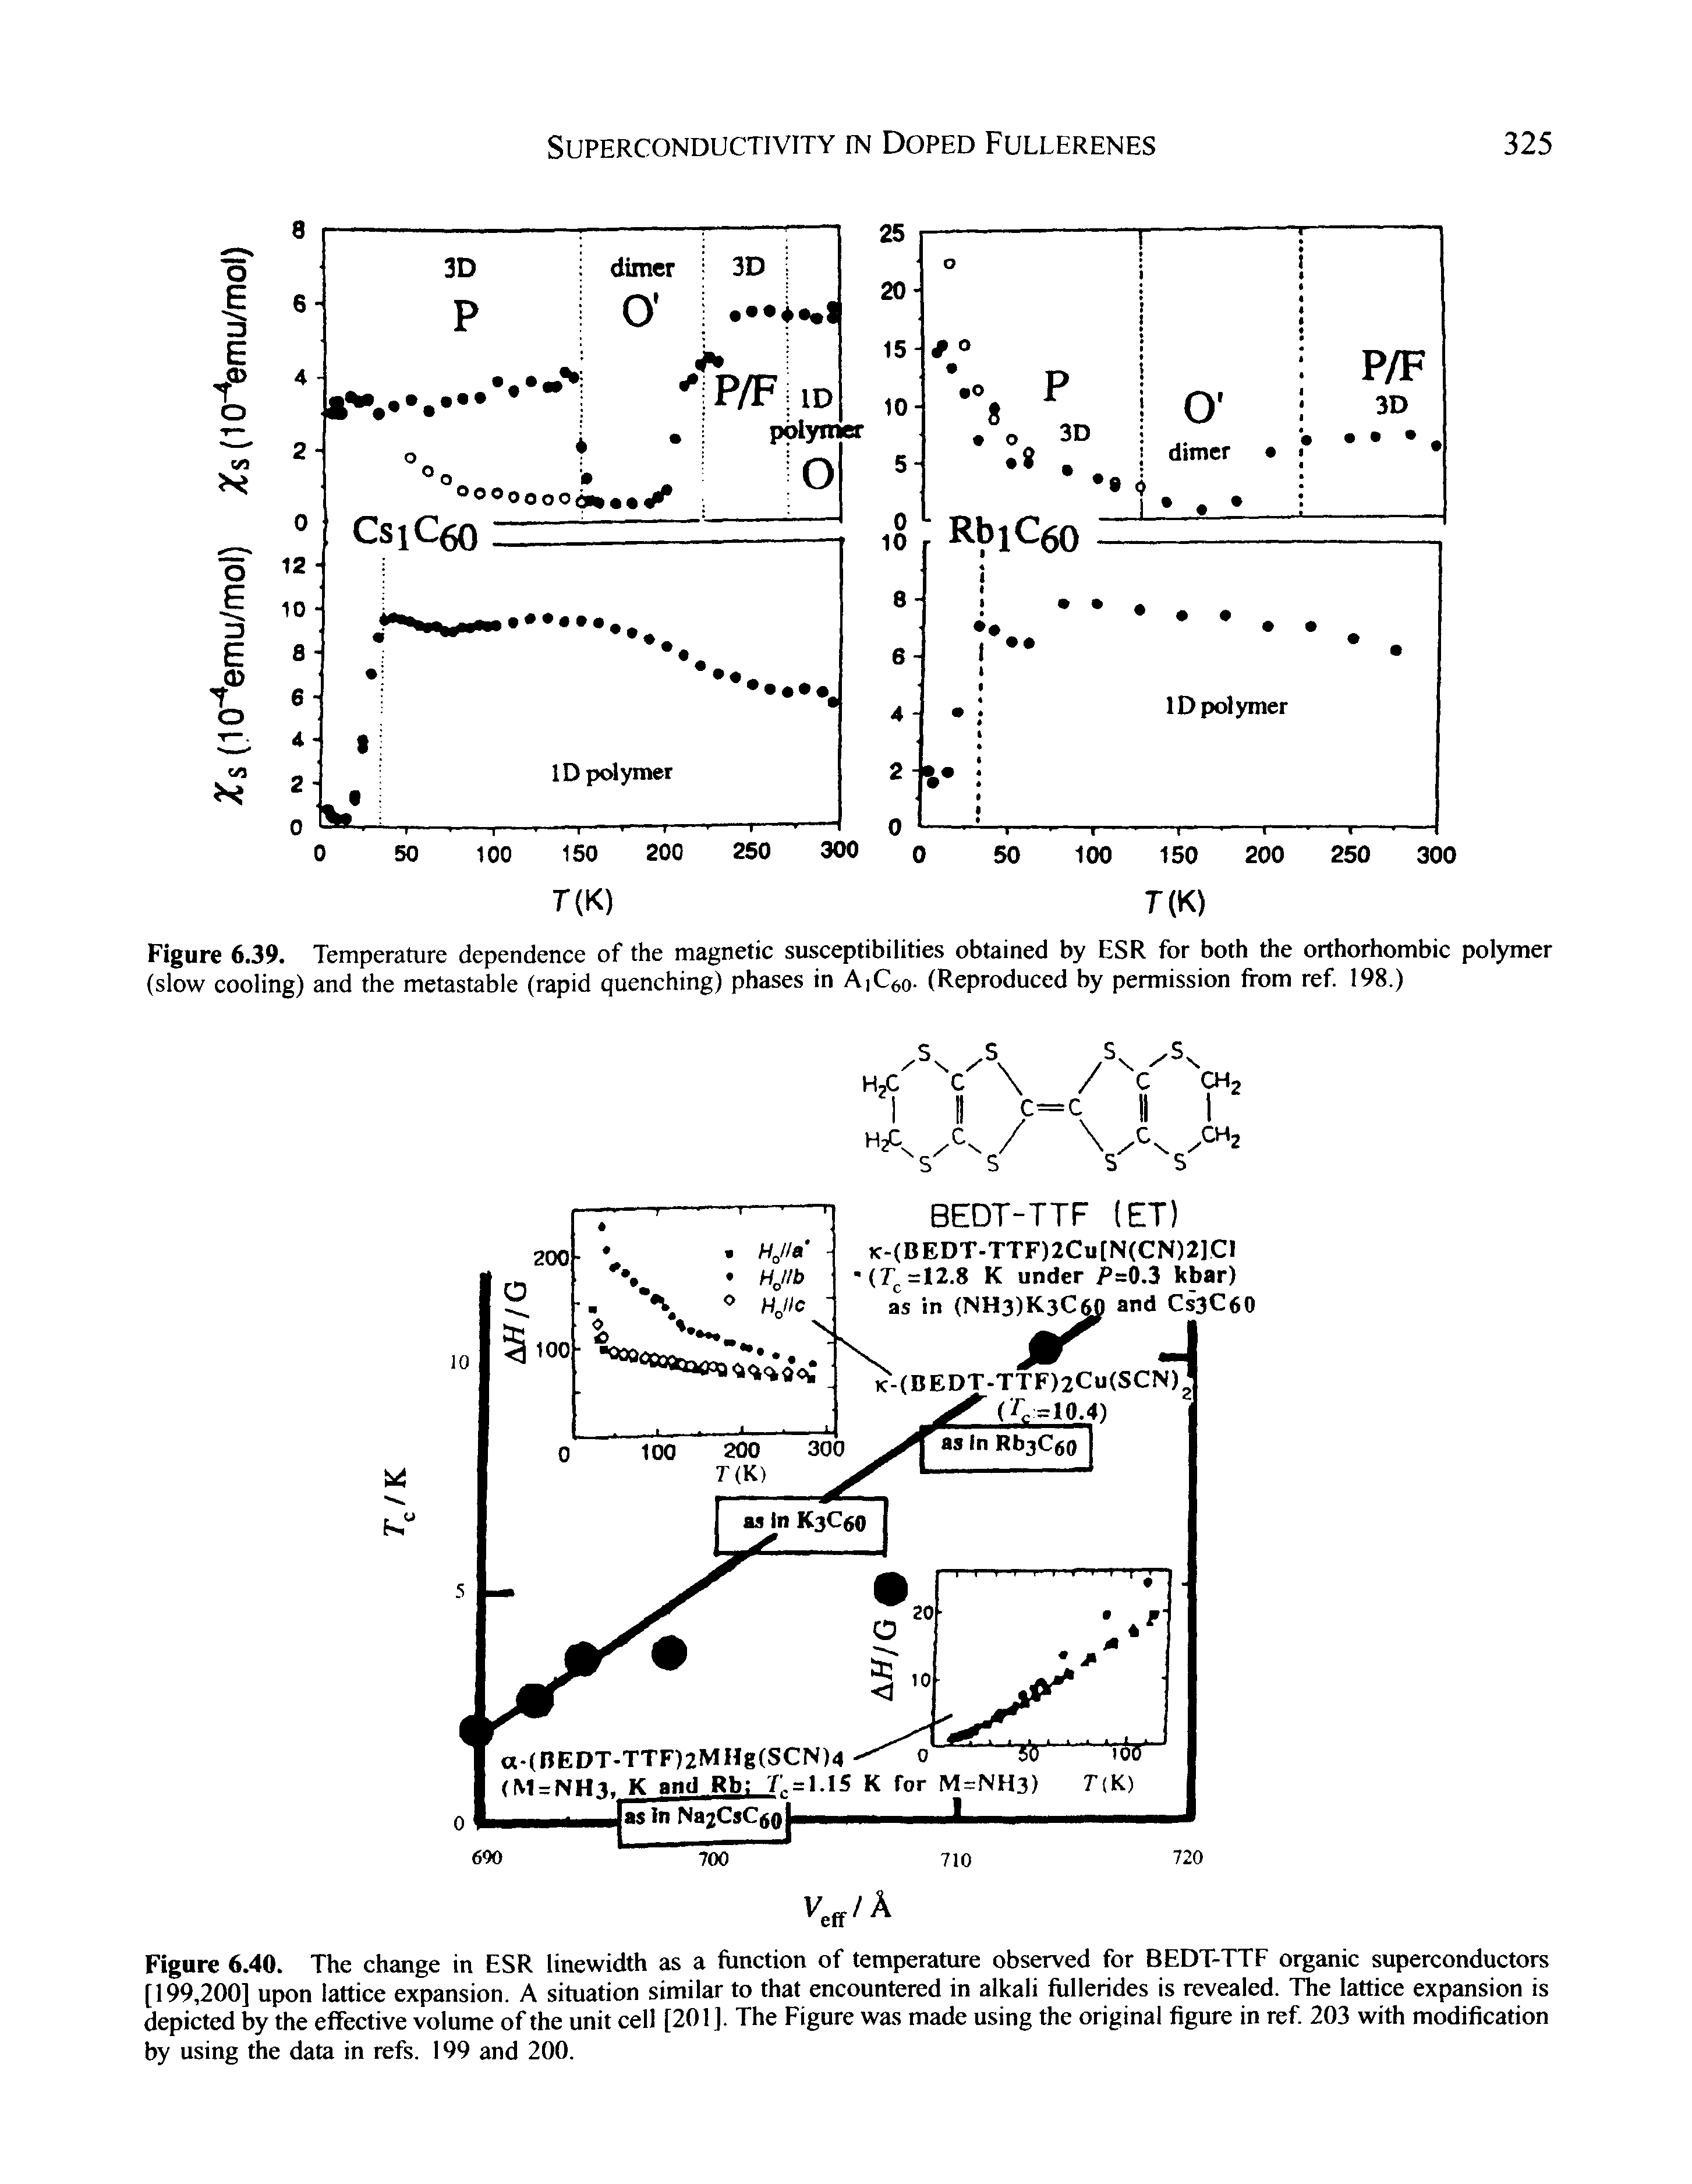 Figure 6.39. Temperature dependence of the magnetic susceptibilities obtained by ESR for both the orthorhombic polymer (slow cooling) and the metastable (rapid quenching) phases in AjC o- (Reproduced by permission from ref 198.)...